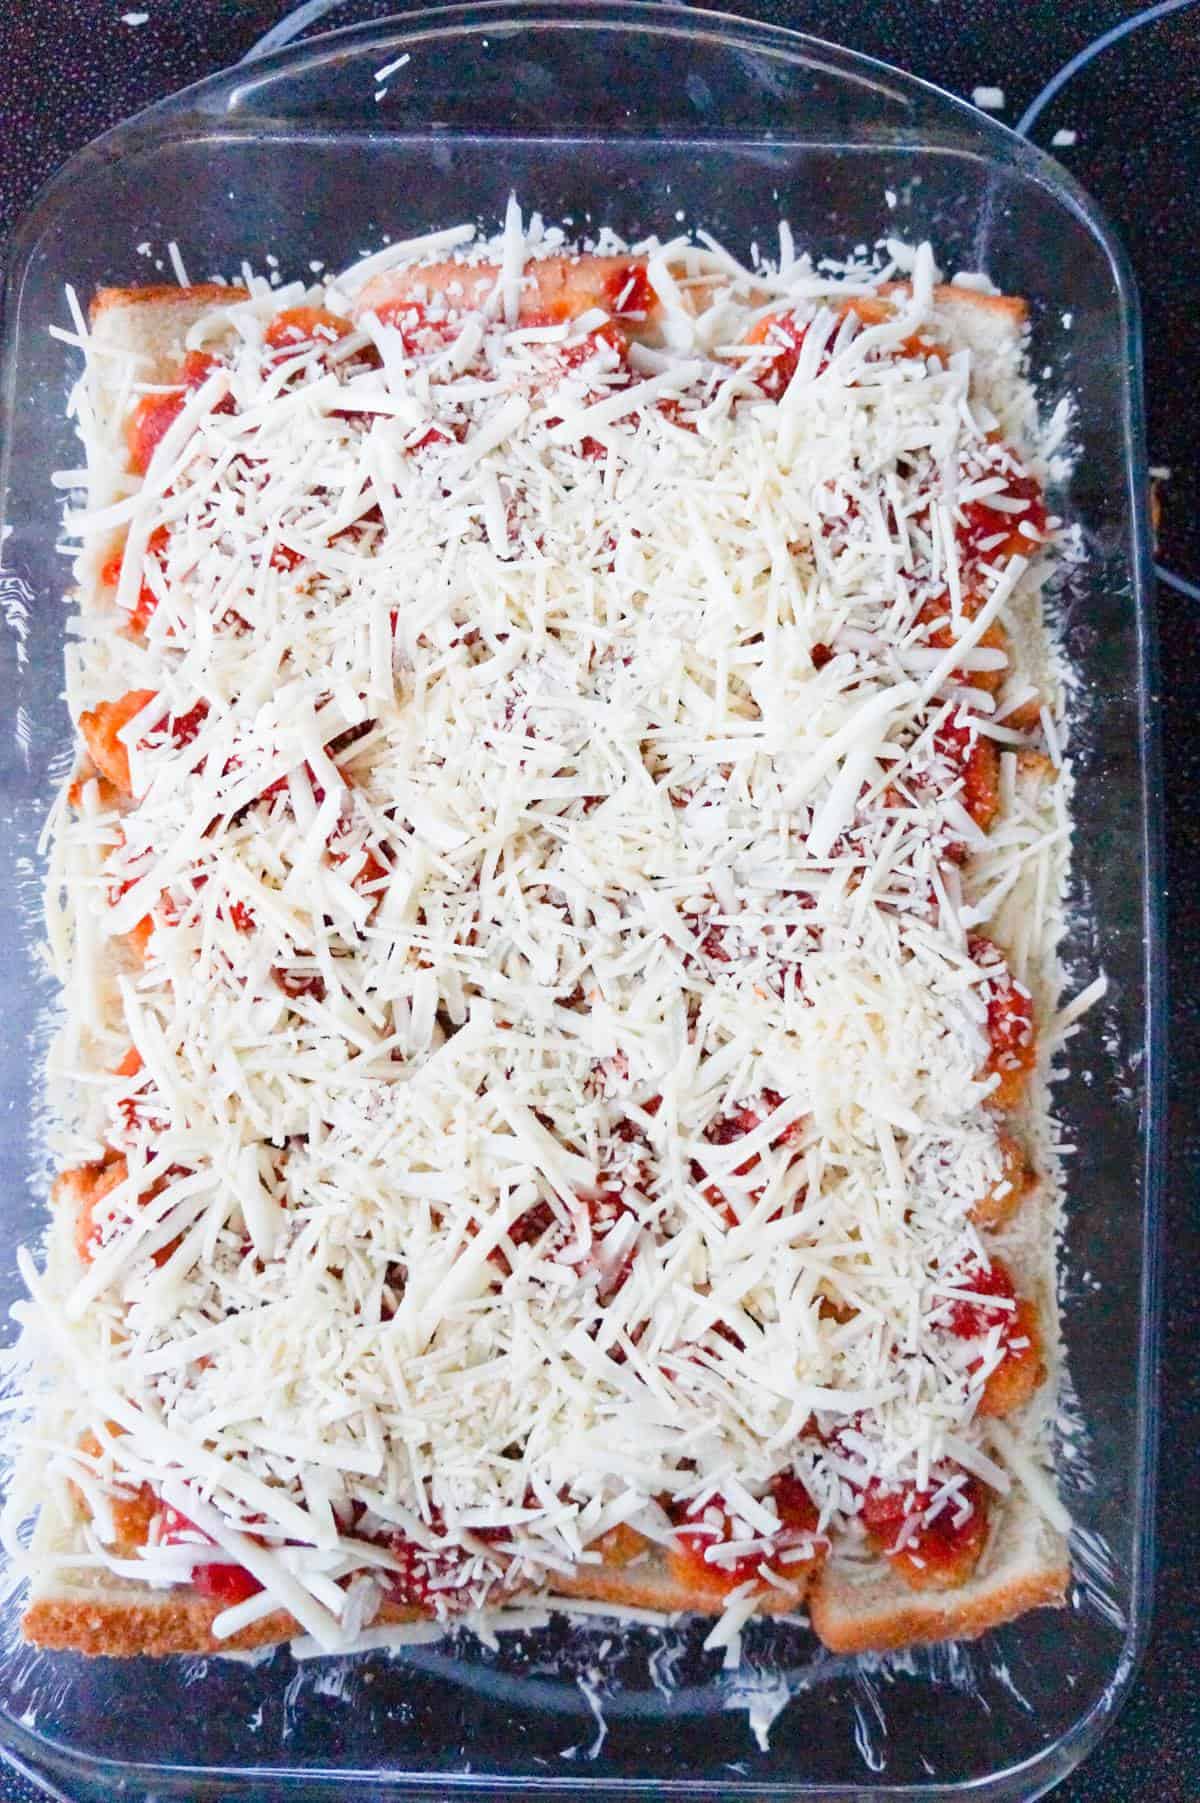 shredded cheese on top of popcorn chicken in a baking dish